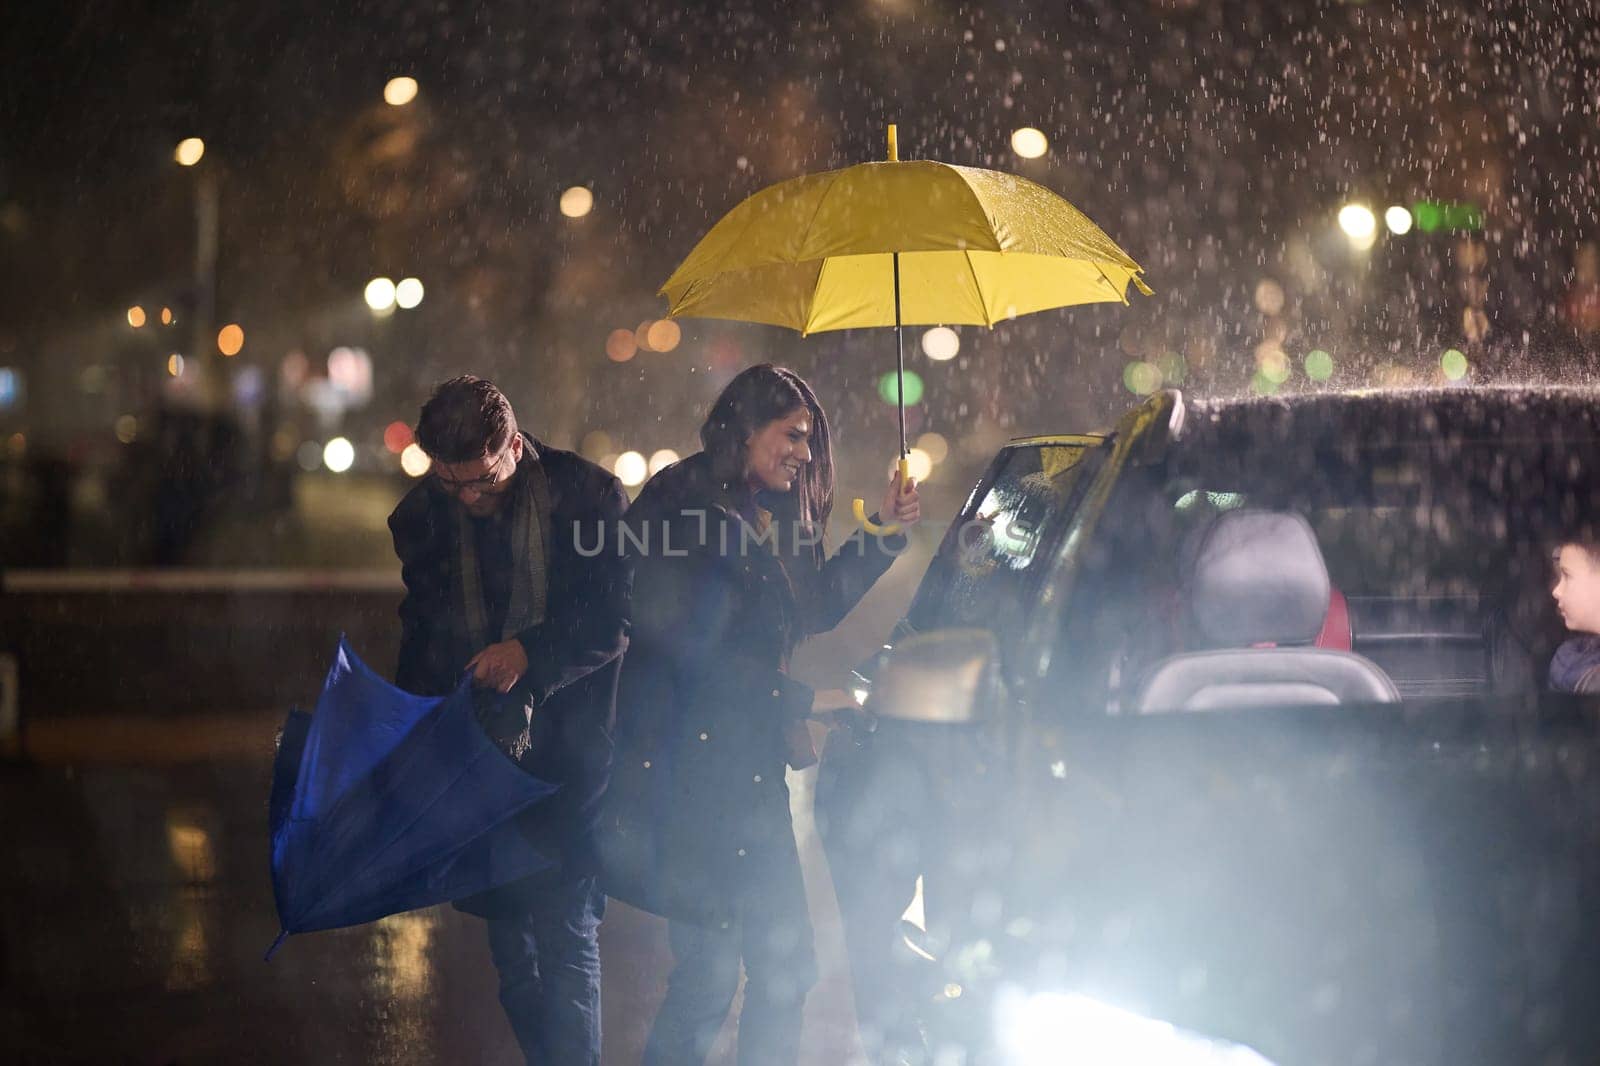 A family man lovingly opens the car for his family in rainy weather, sheltering them with an umbrella.